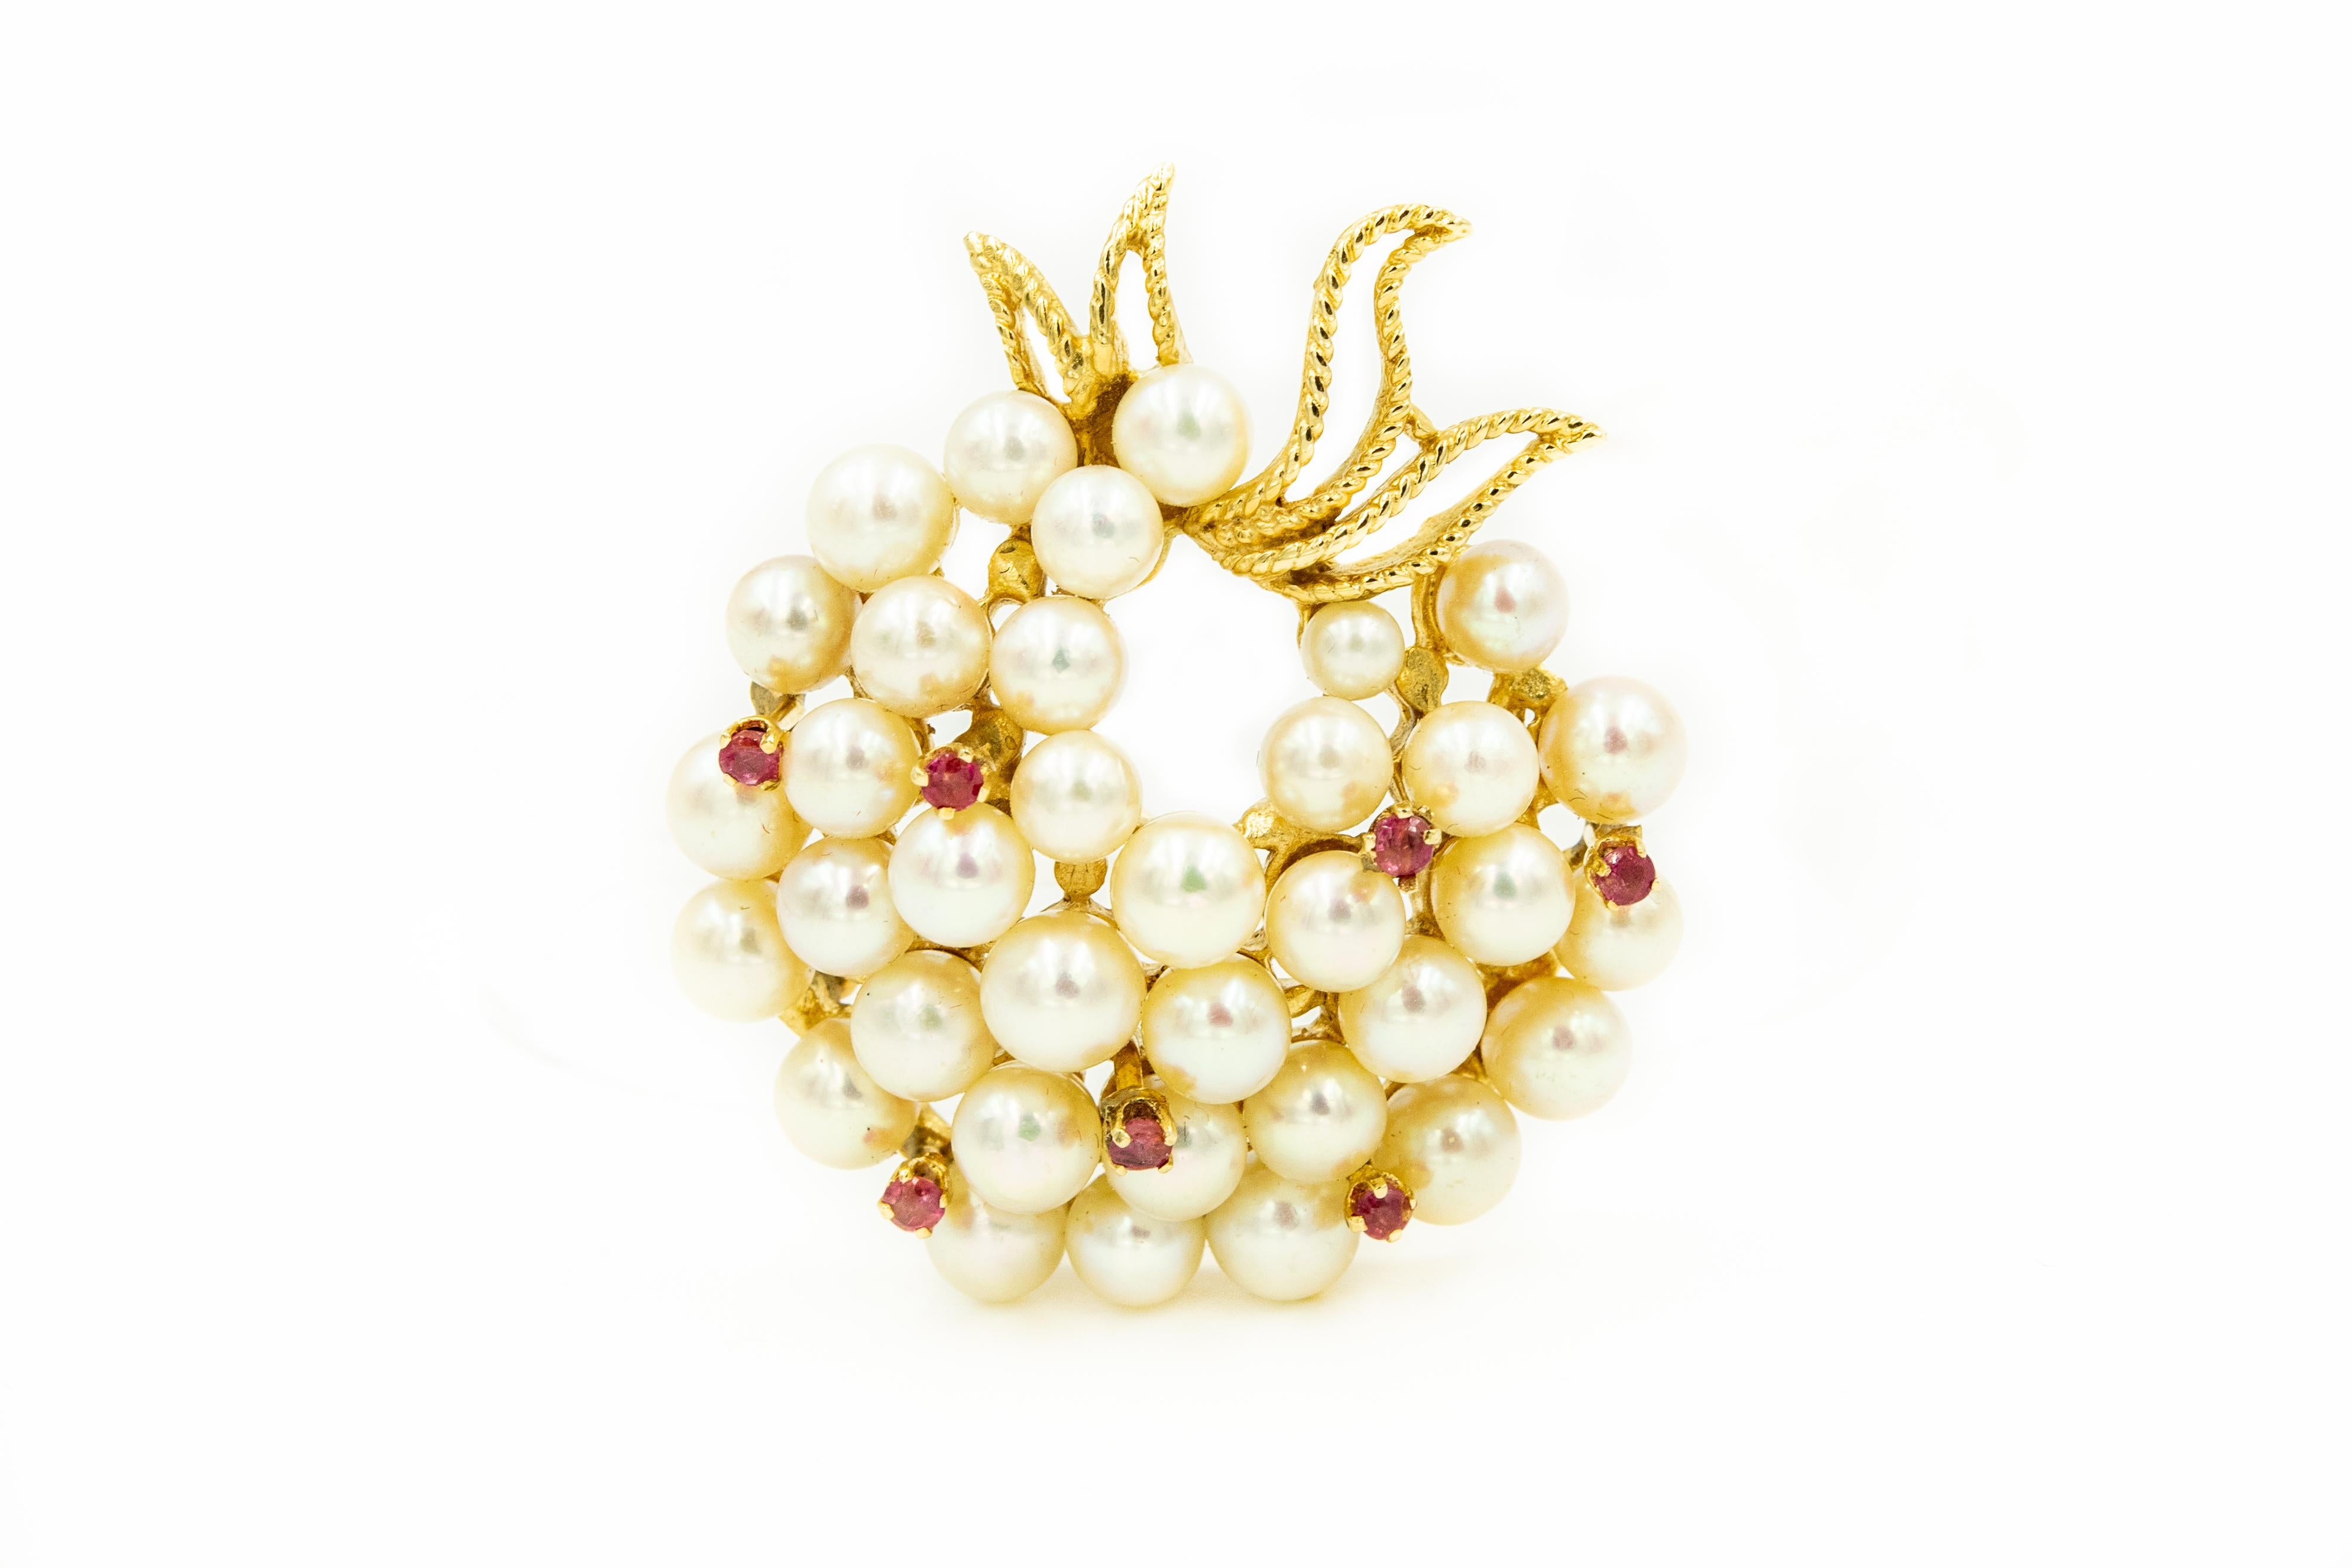 Wonderful 1960s three dimensional graduated cultured pearl brooch with ruby accents and a twisted gold bow at the bottom.  This circle design brooch resembles a wreath or a bouquet.

Marked 14k on the back 

It was purchased with a pearl ring that I